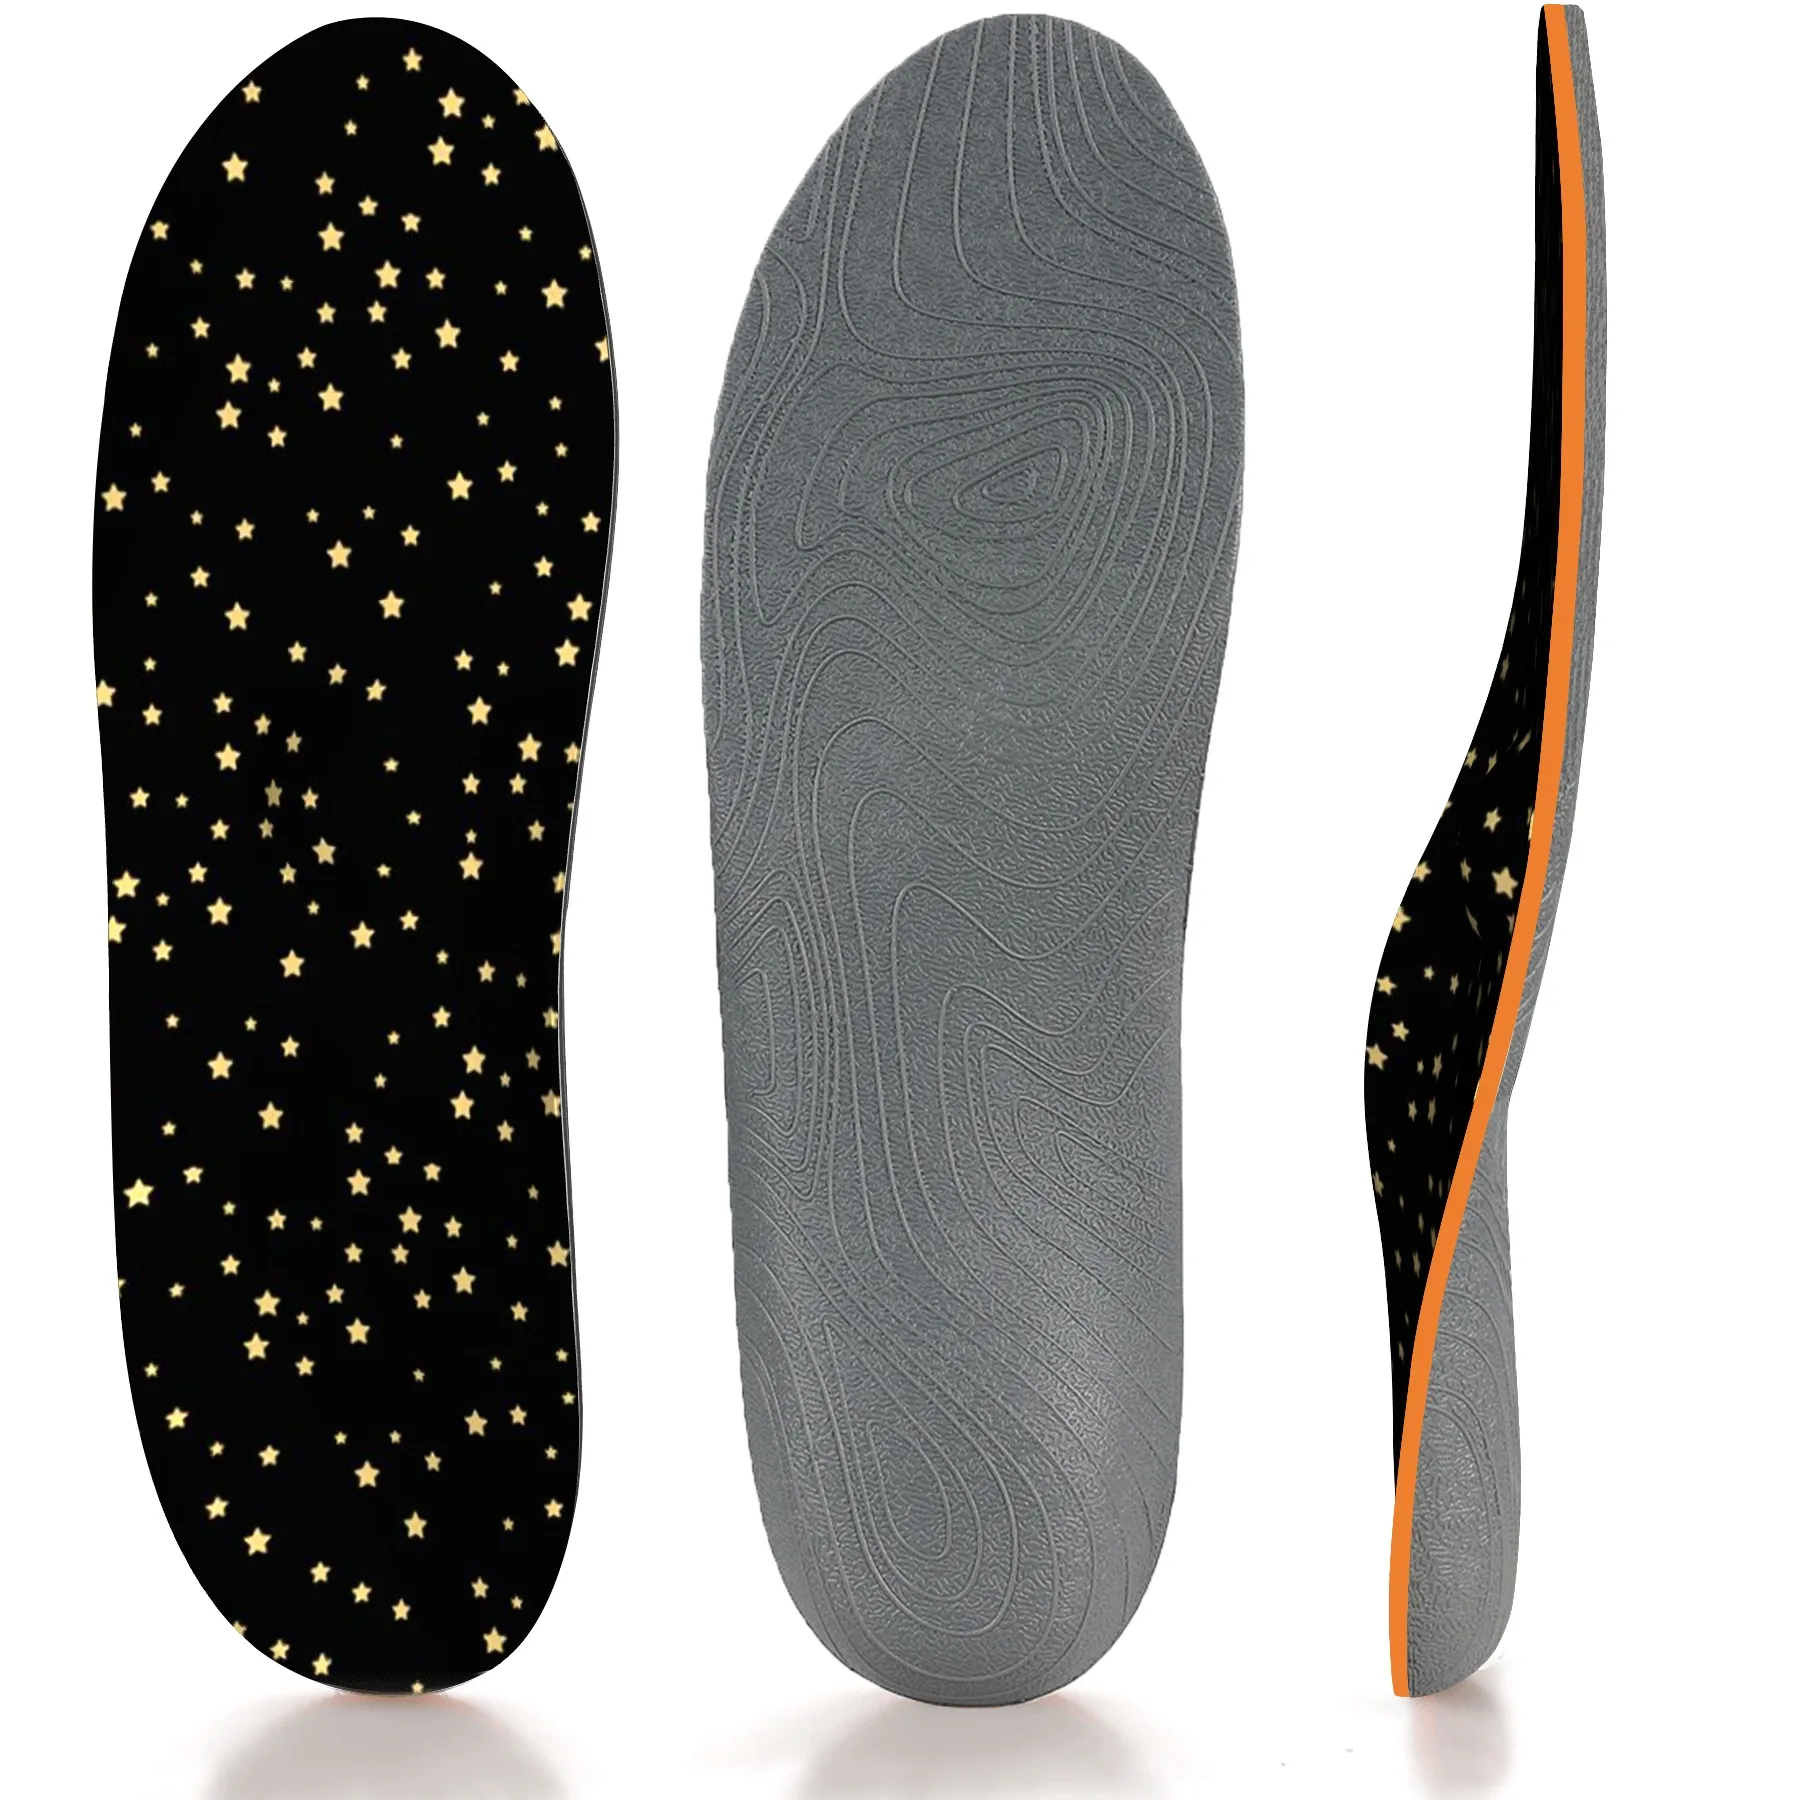 Full-Length Breathable Insoles Absorb Sweat Long Station Gentleman Shoes